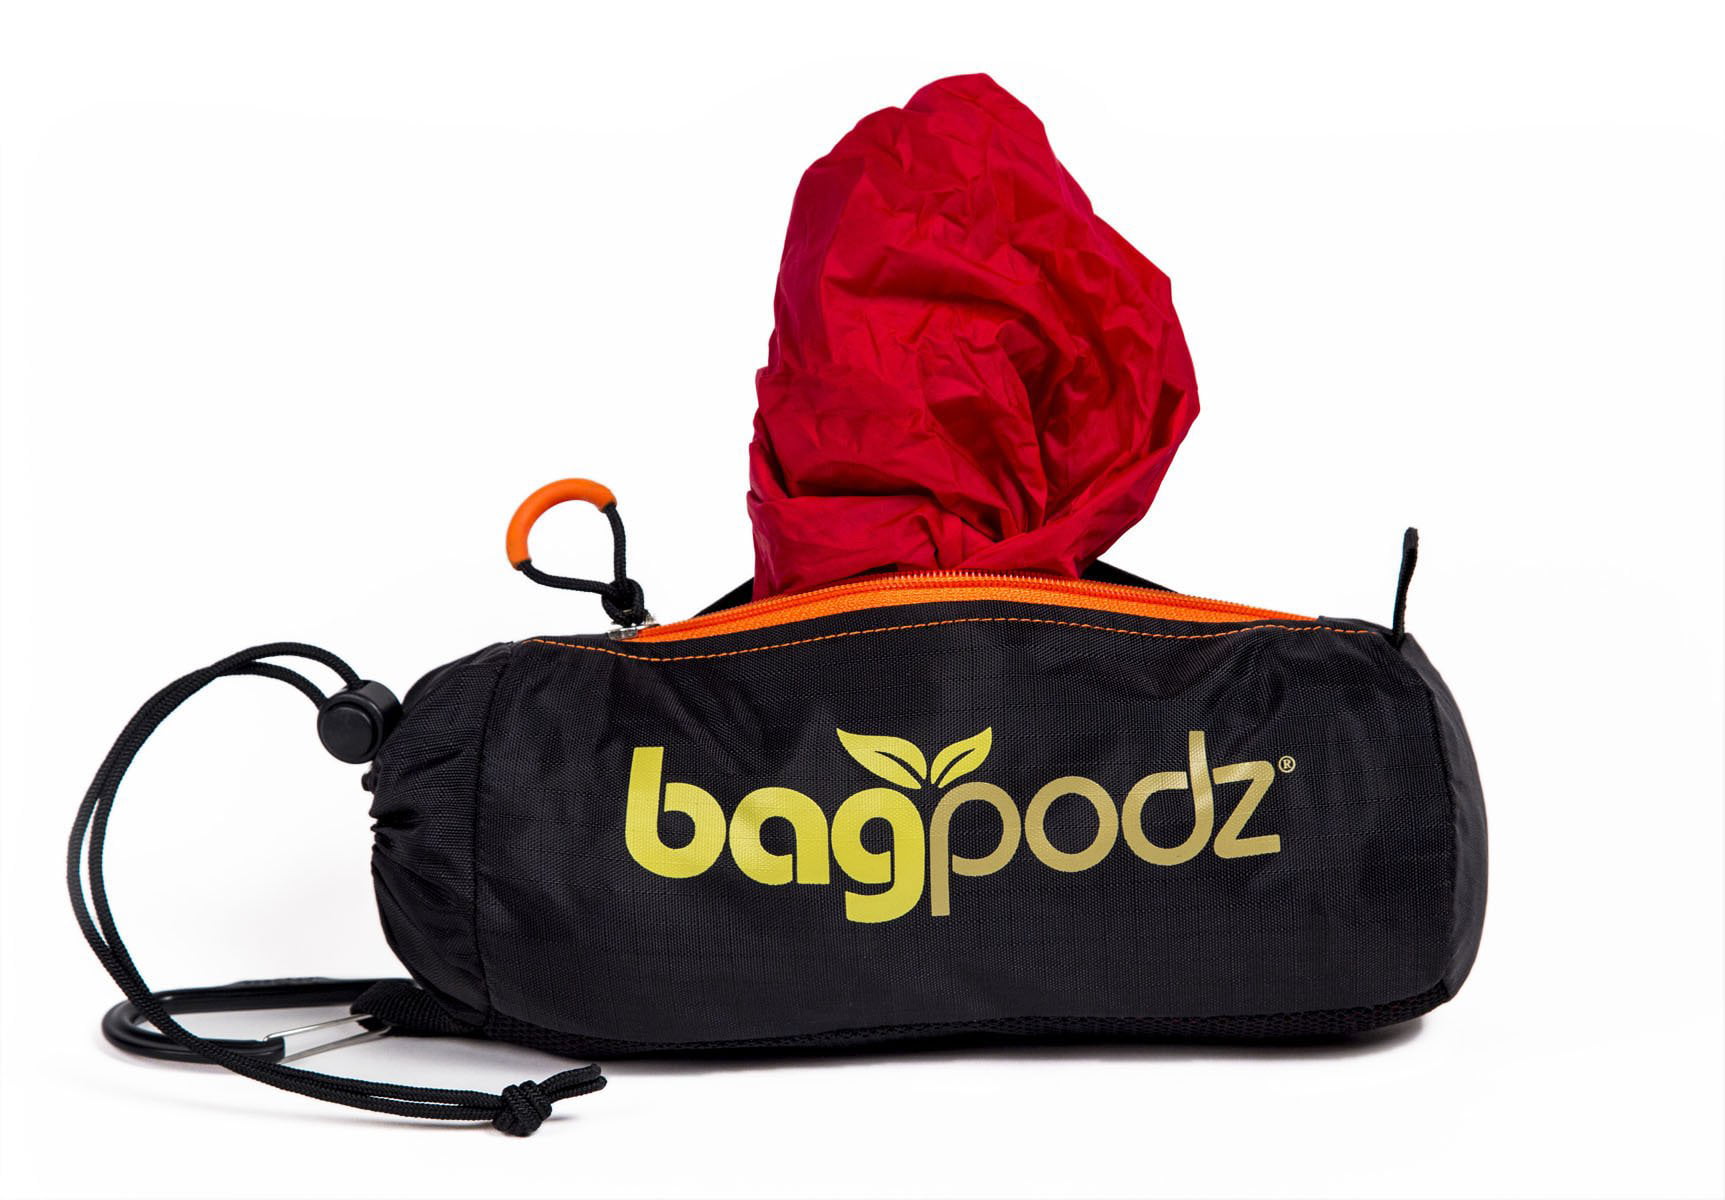 Bagpodz Reusable Grocery Bag and Storage System Cayenne Red Contains 10 00858275005141 for sale online 